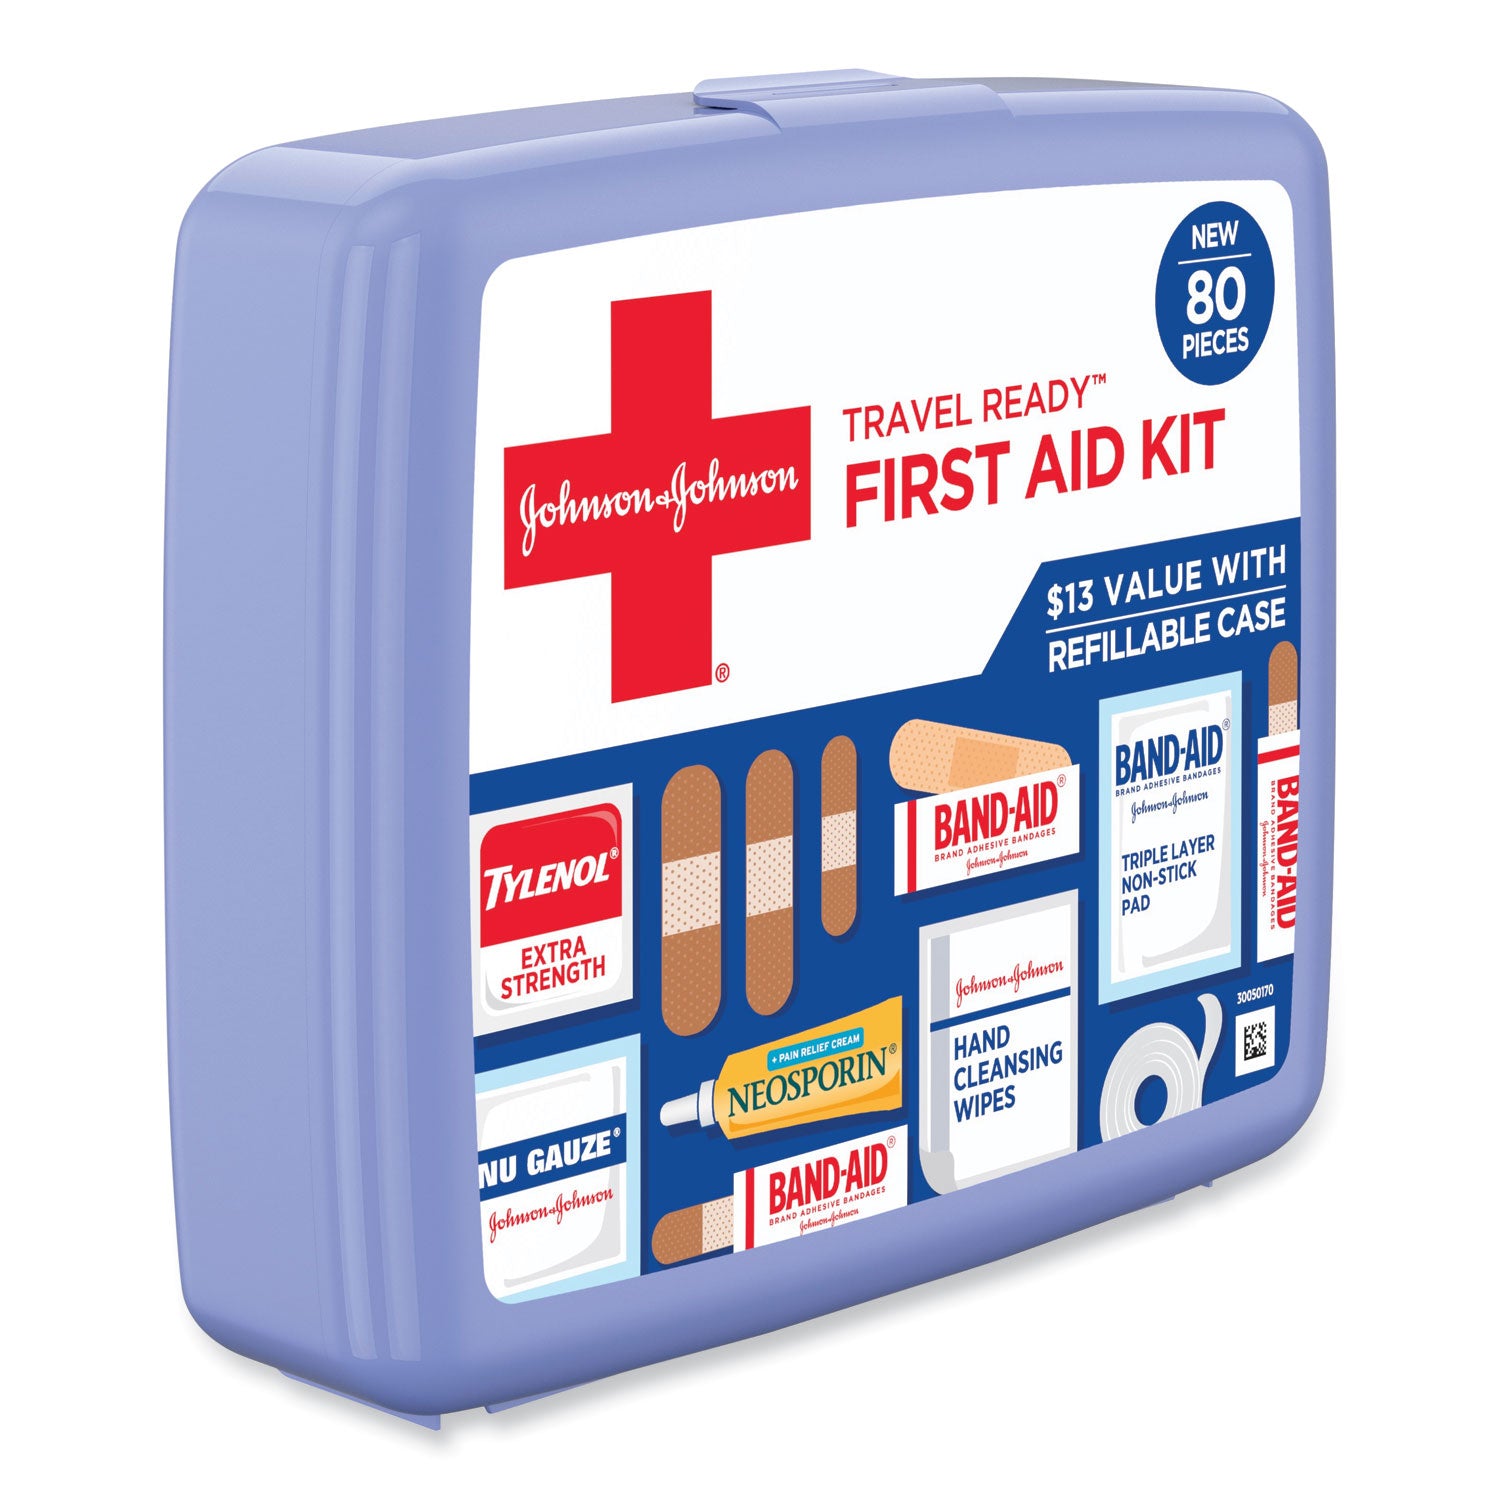 red-cross-travel-ready-portable-emergency-first-aid-kit-80-pieces-plastic-case_joj202068 - 4